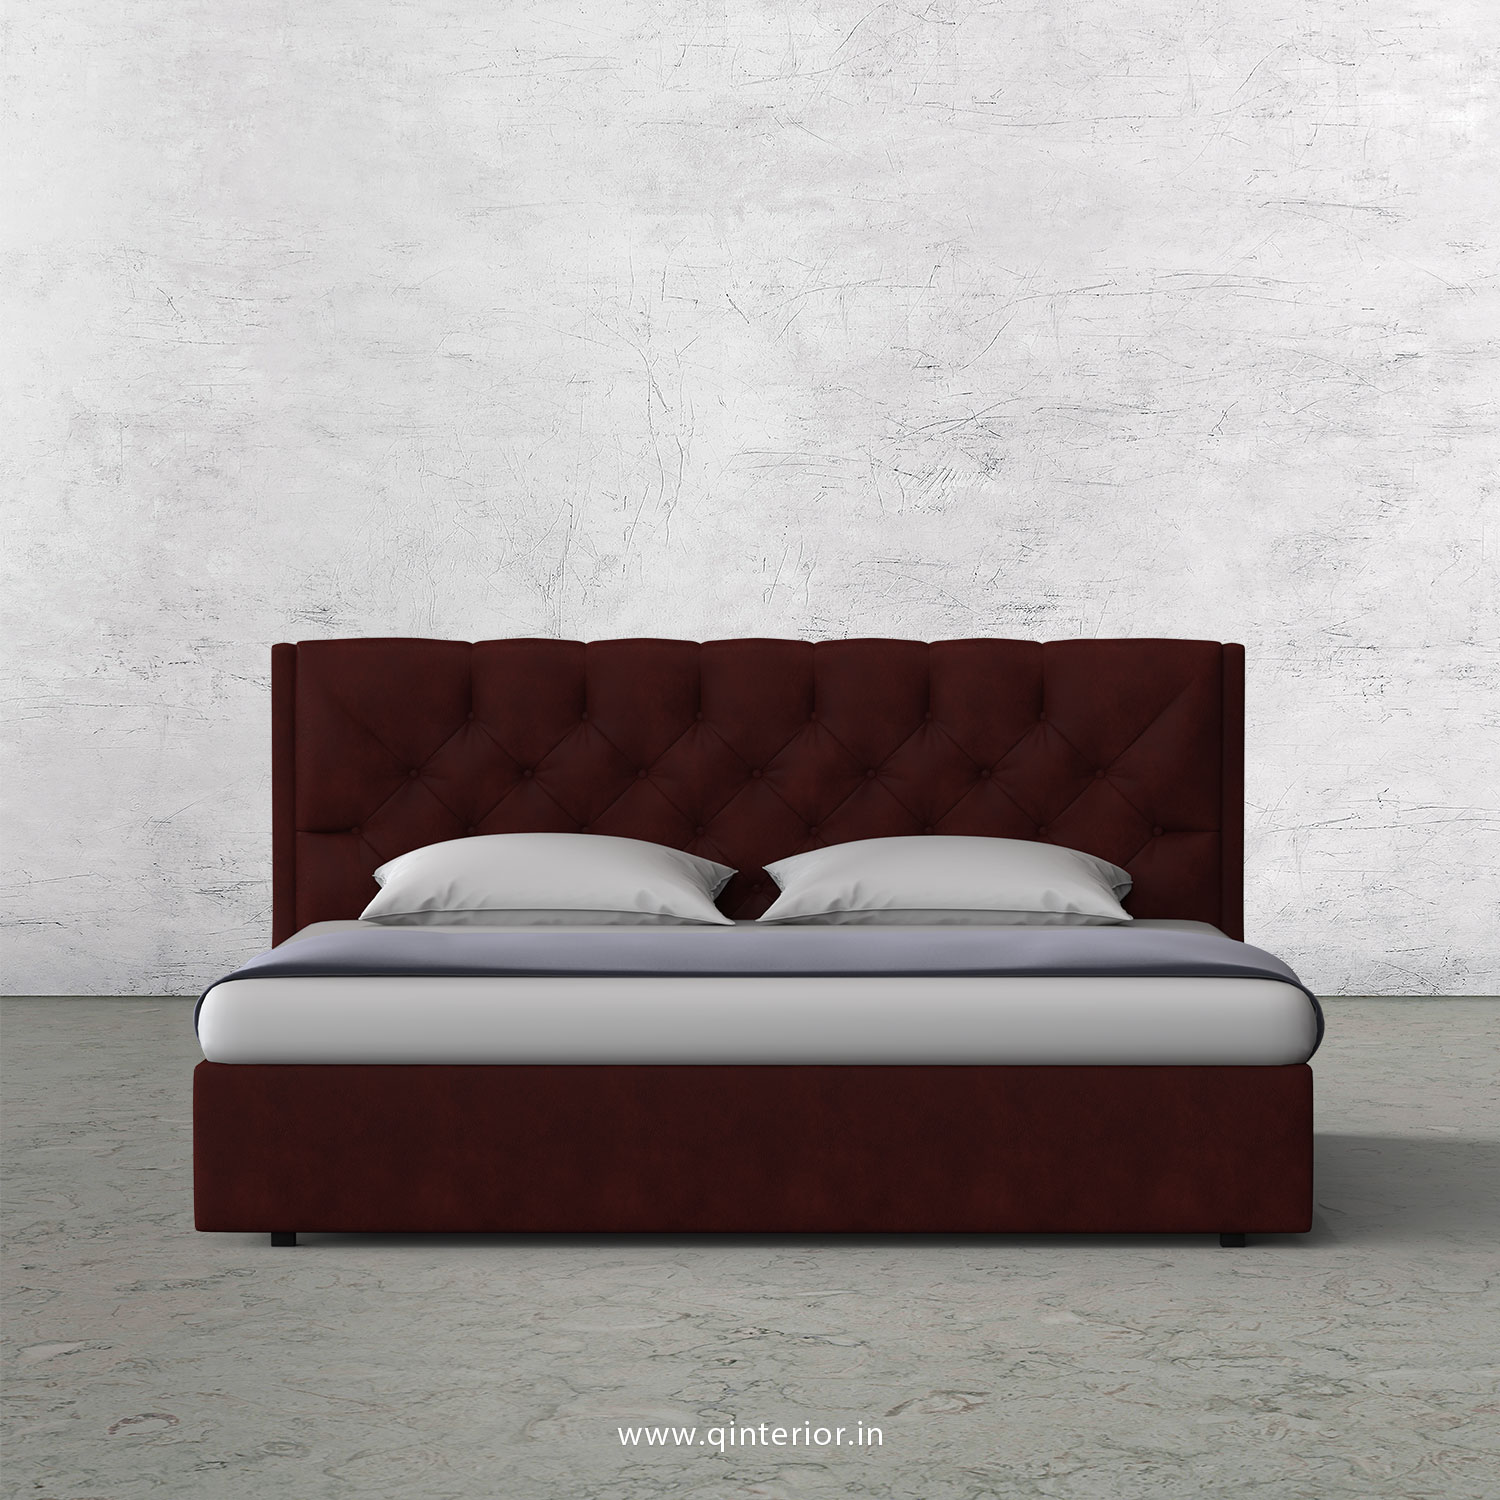 Scorpius Queen Bed in Fab Leather Fabric - QBD009 FL17